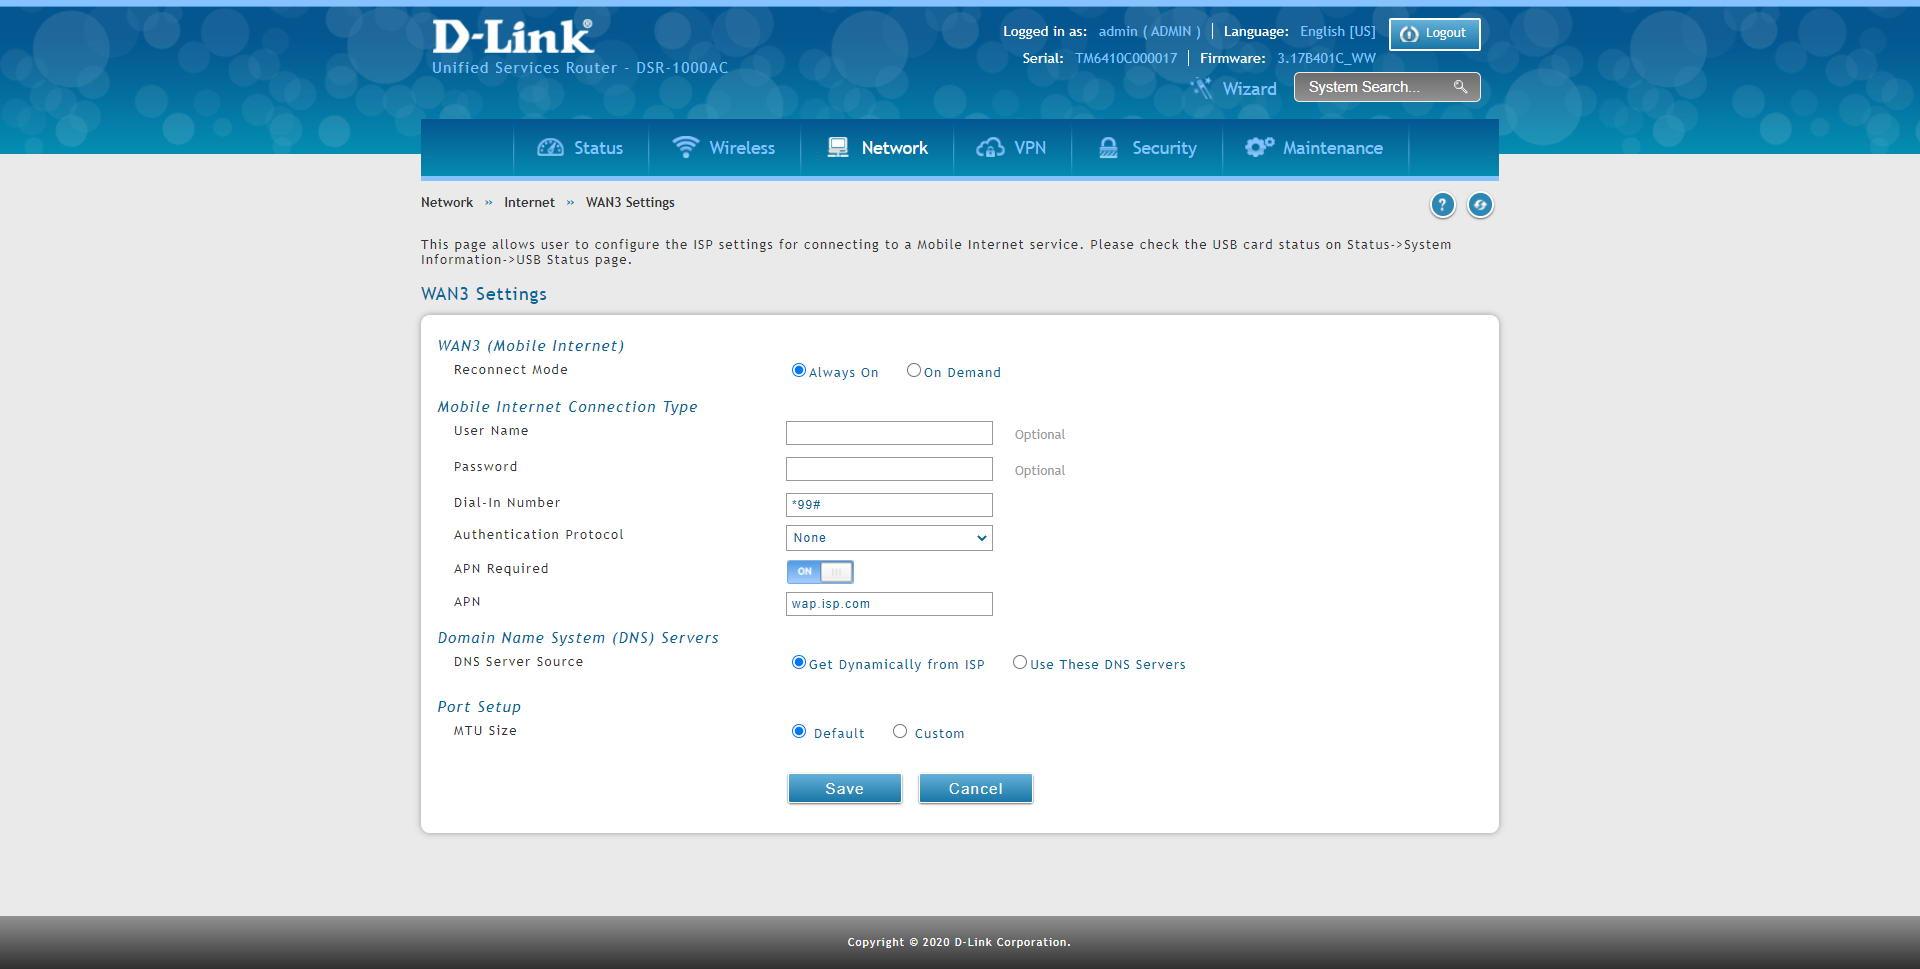 Configure two WANs on the D-Link DSR-1000AC router and load balancing